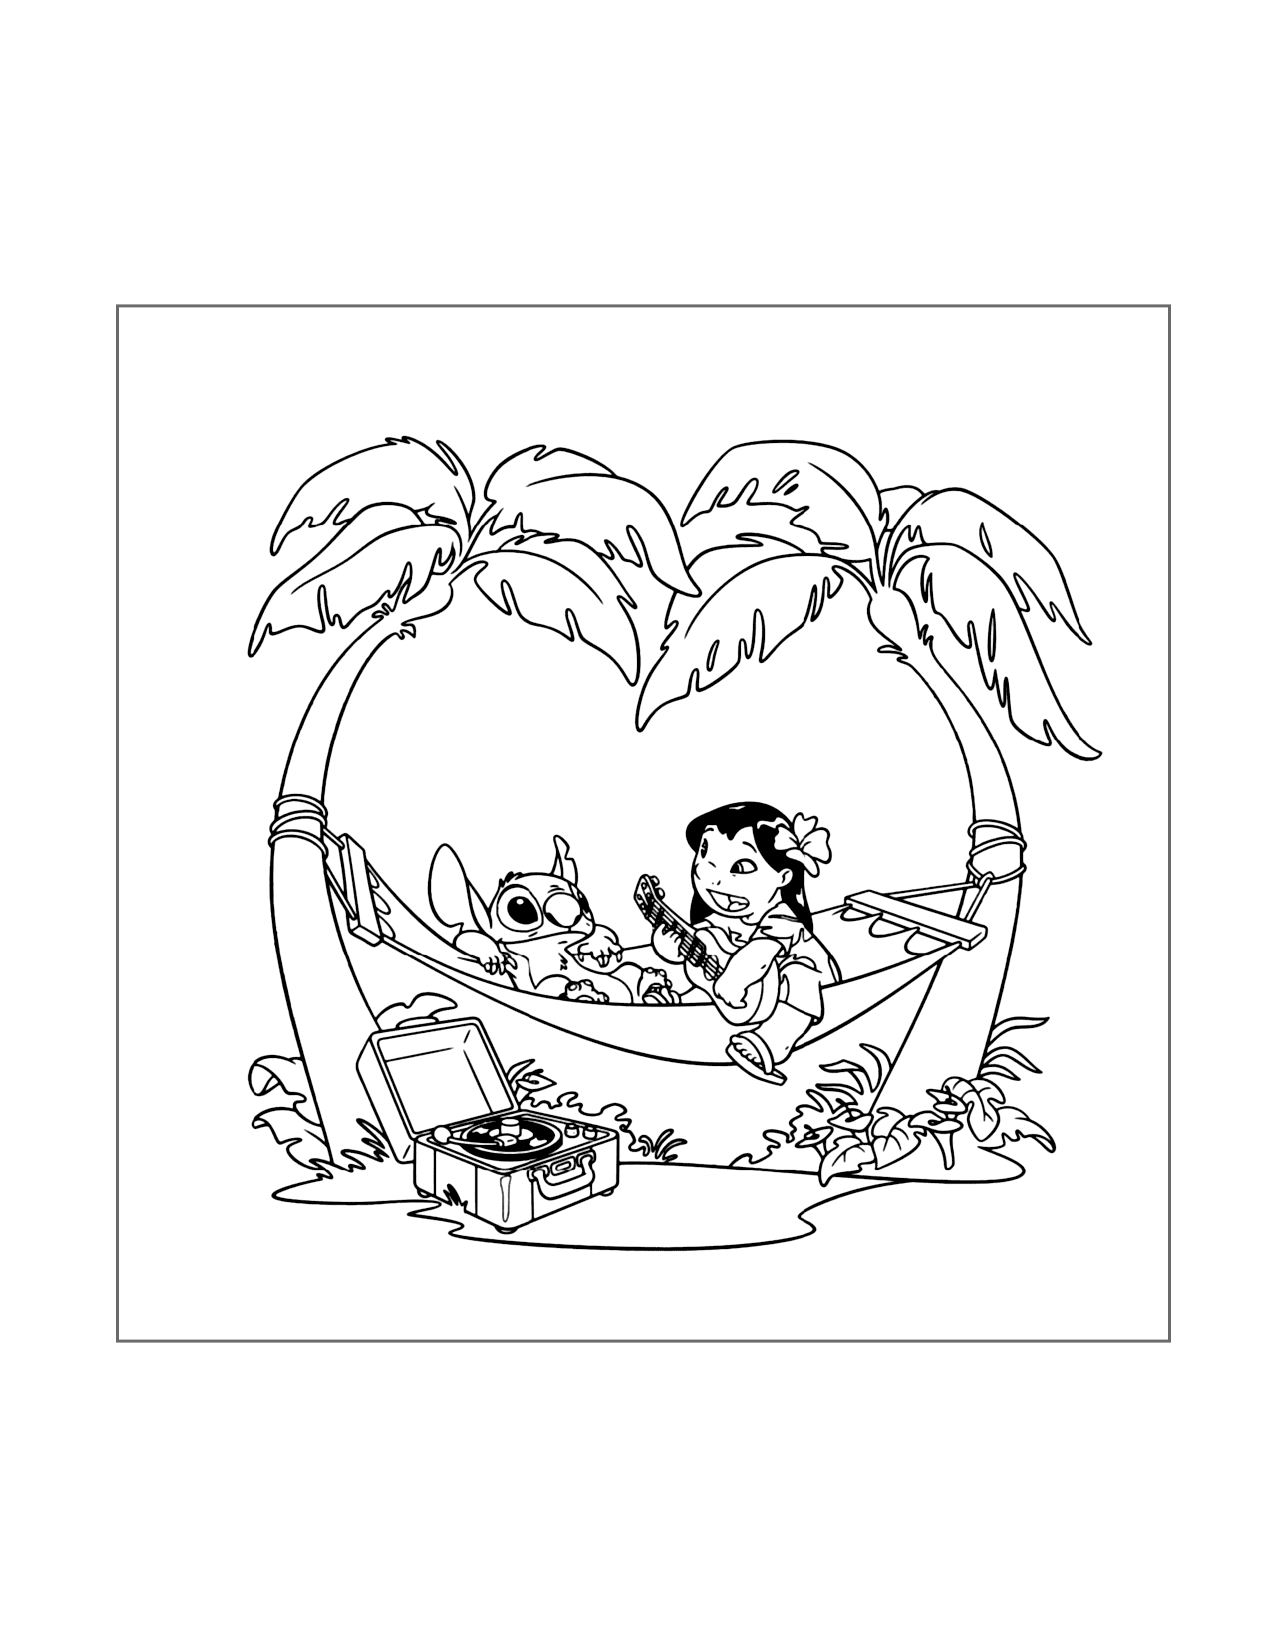 Lilo Sings A Song Coloring Page